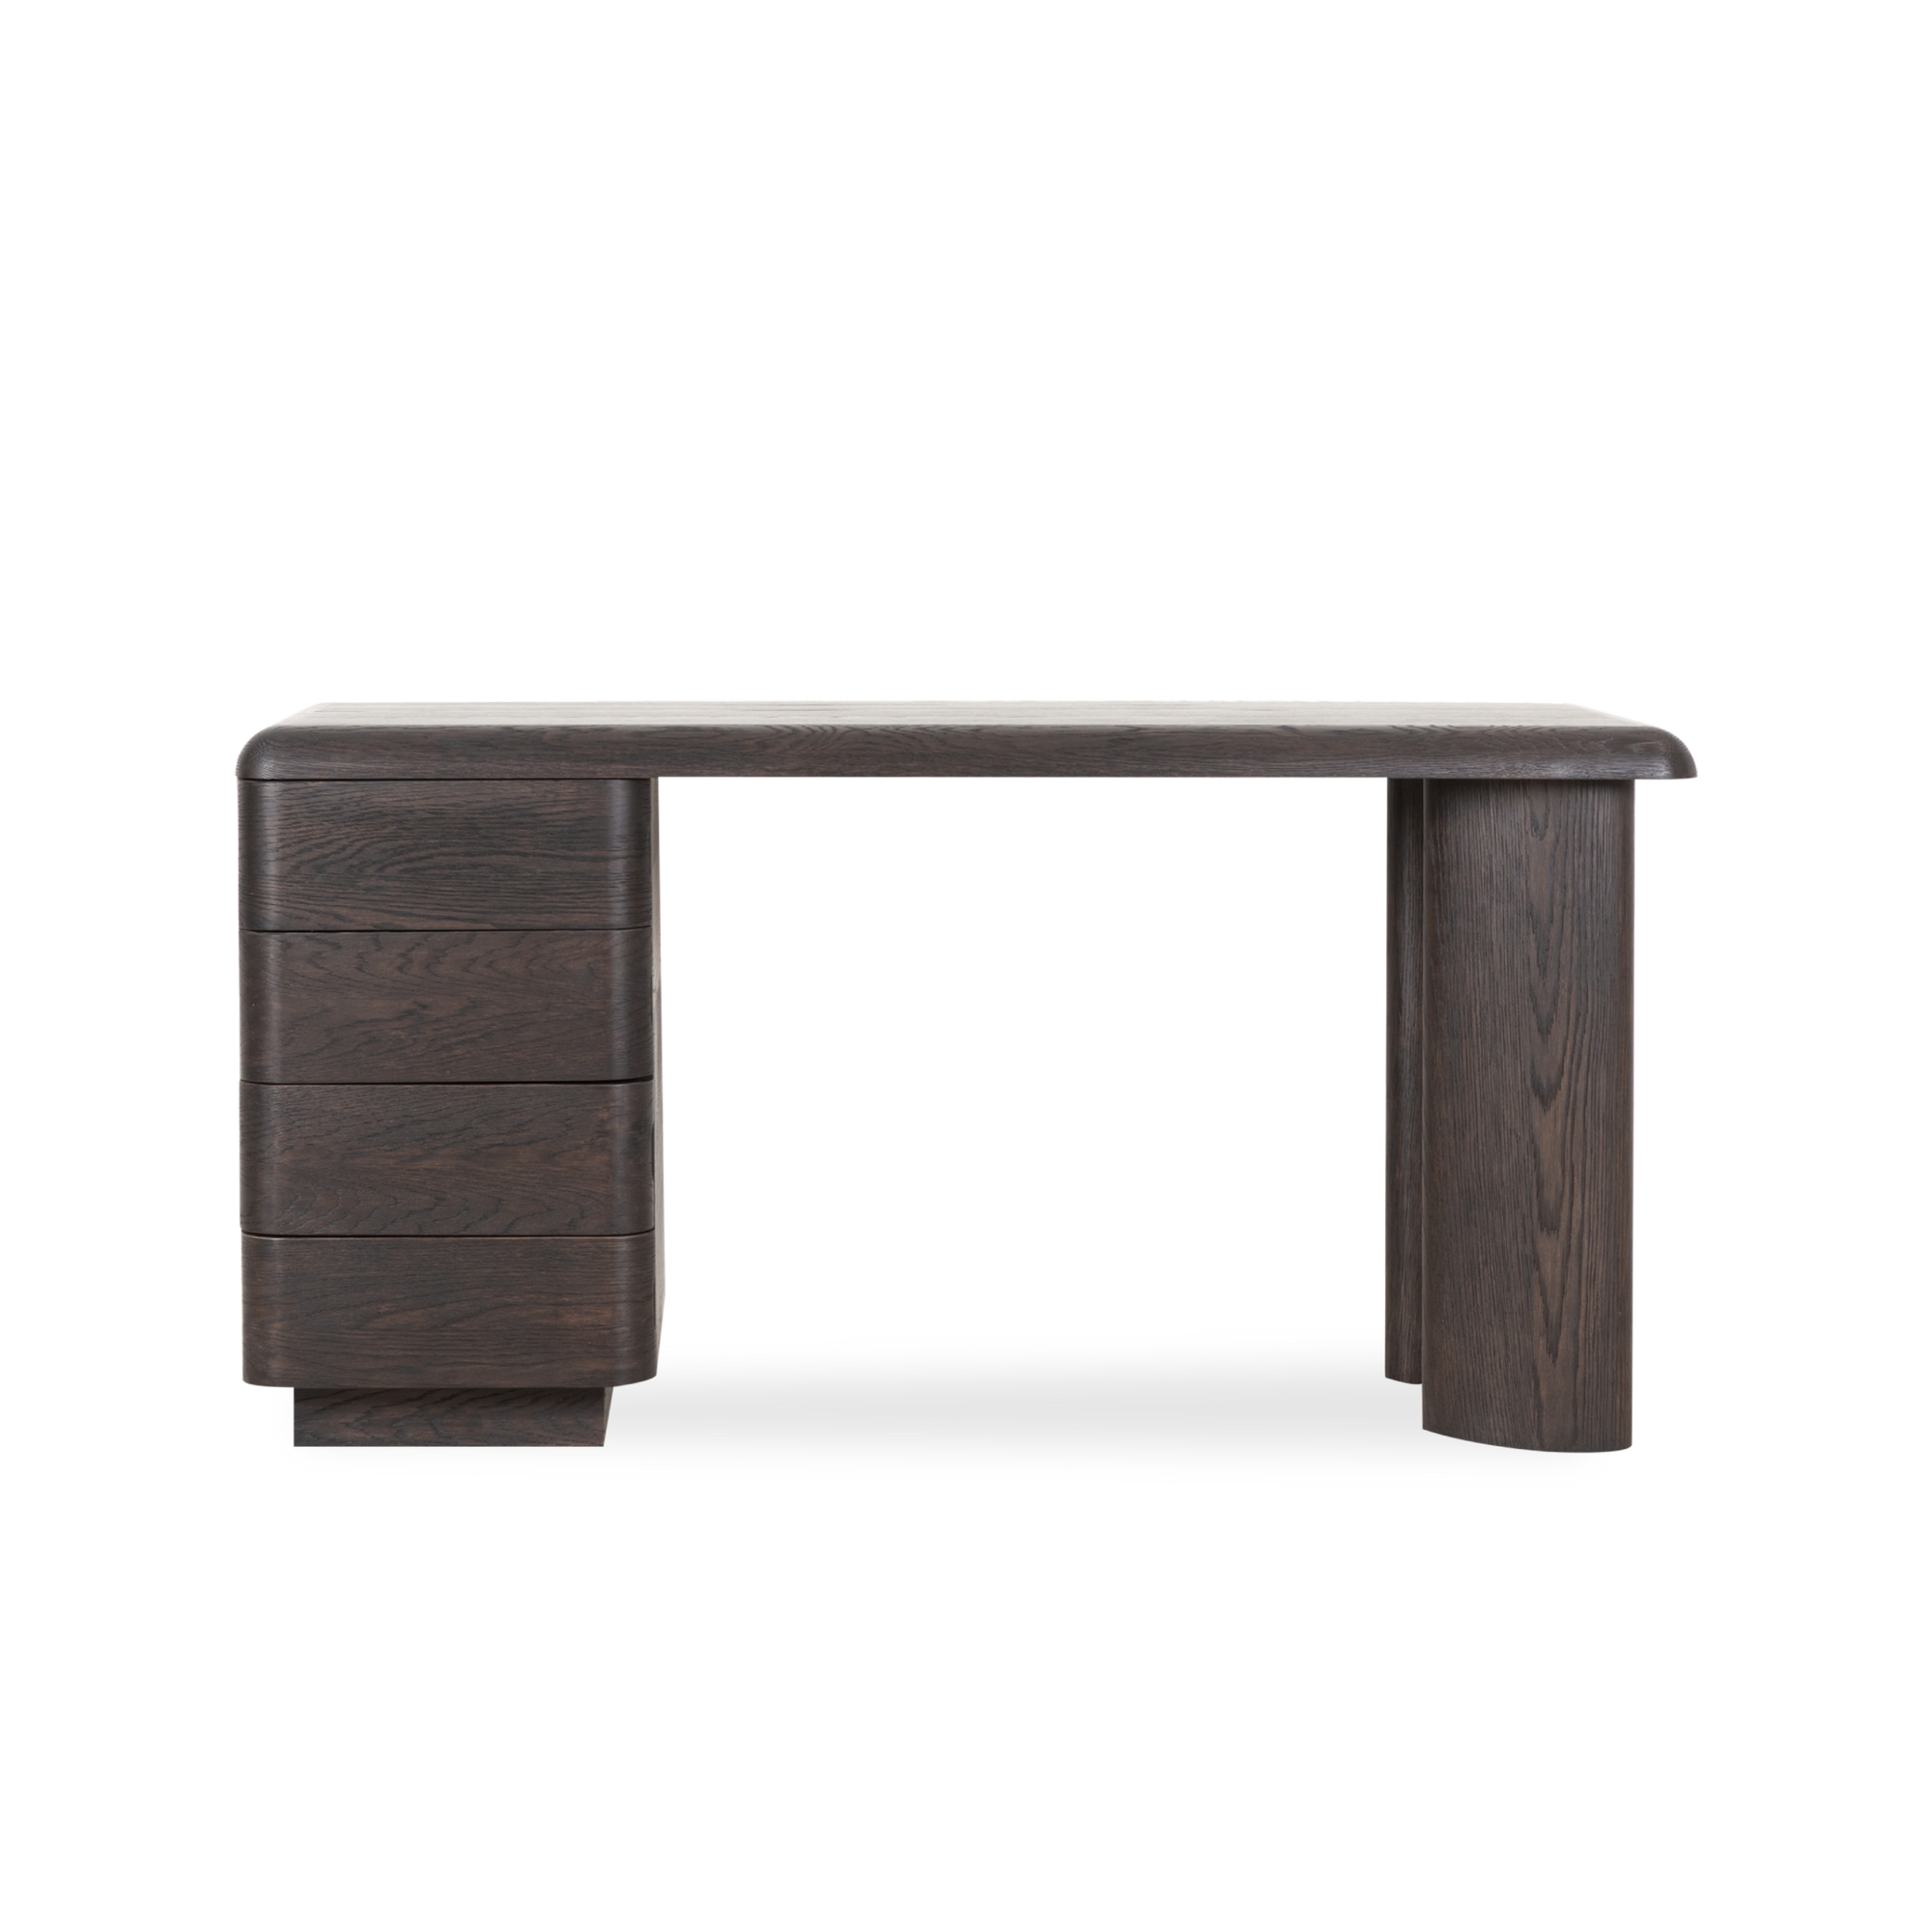 Built from sandblasted oak, the Column Desk has a raw and refined spirit.